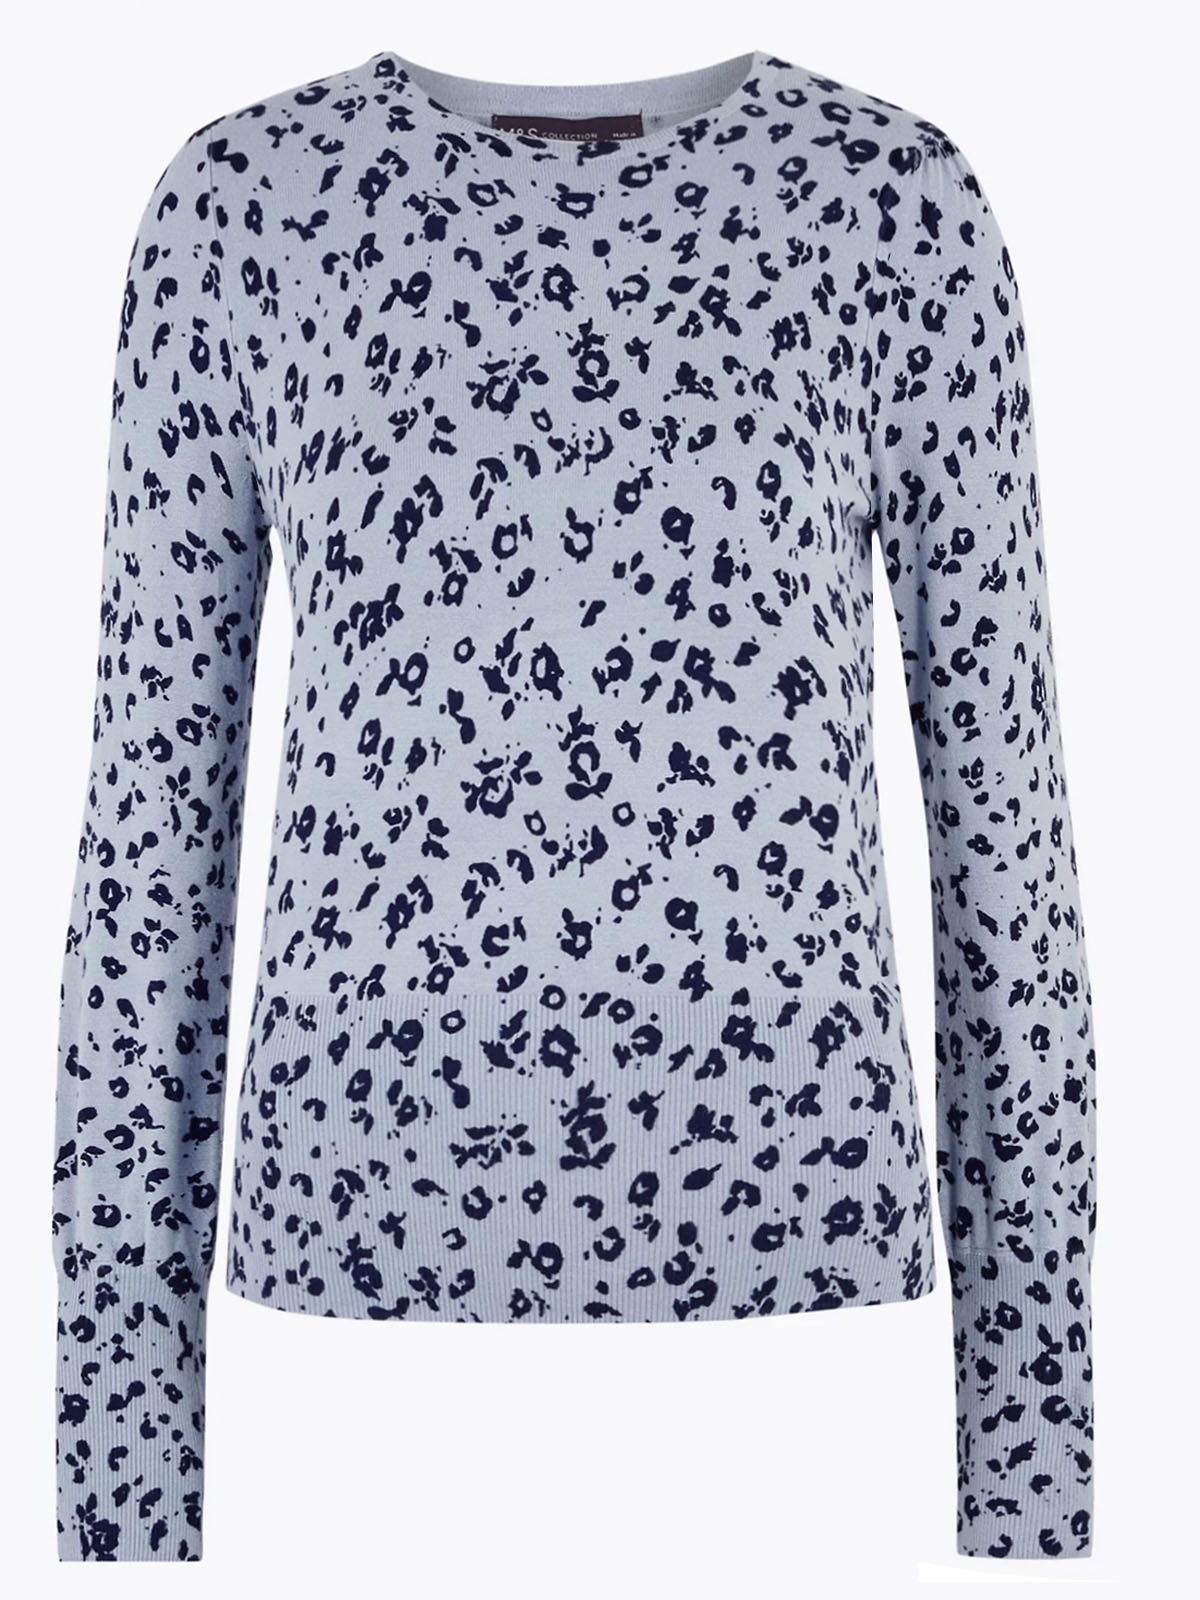 Marks and Spencer - - M&5 BLUE Animal Print Crew Neck Jumper - Size 8 to 22